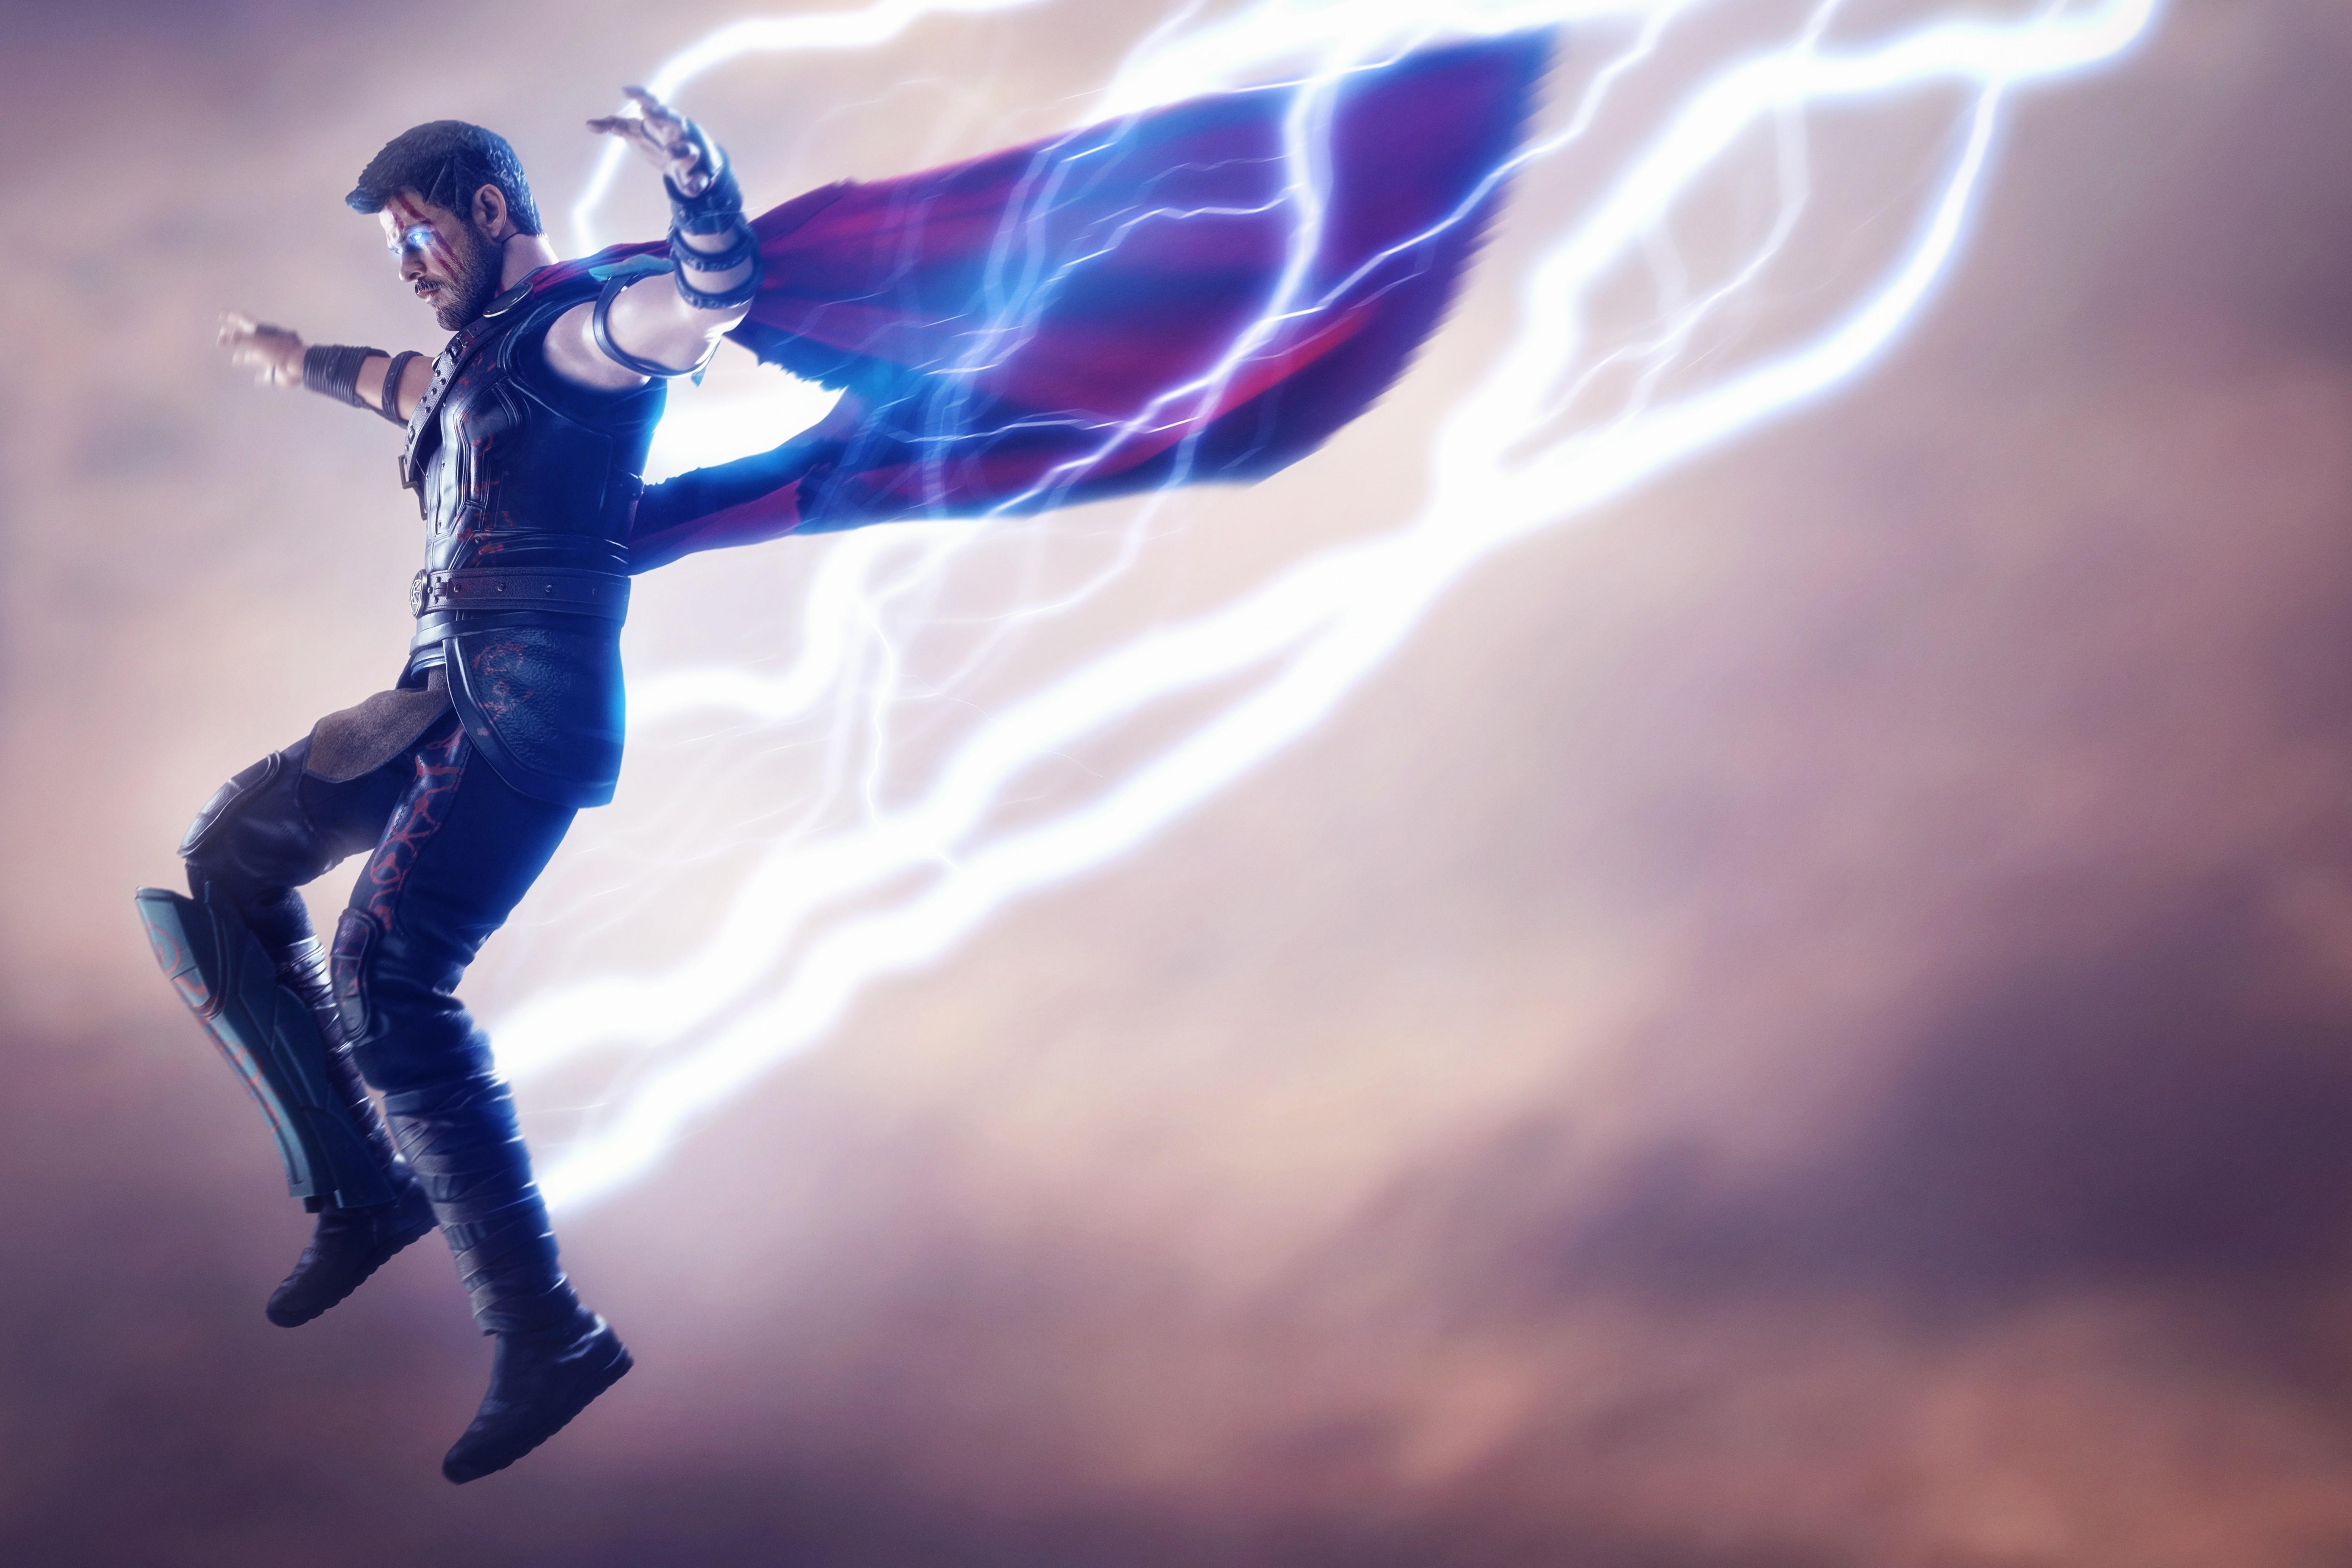 Download 5637x3758 Thor, Lightning, Floating, Cape Wallpapers.